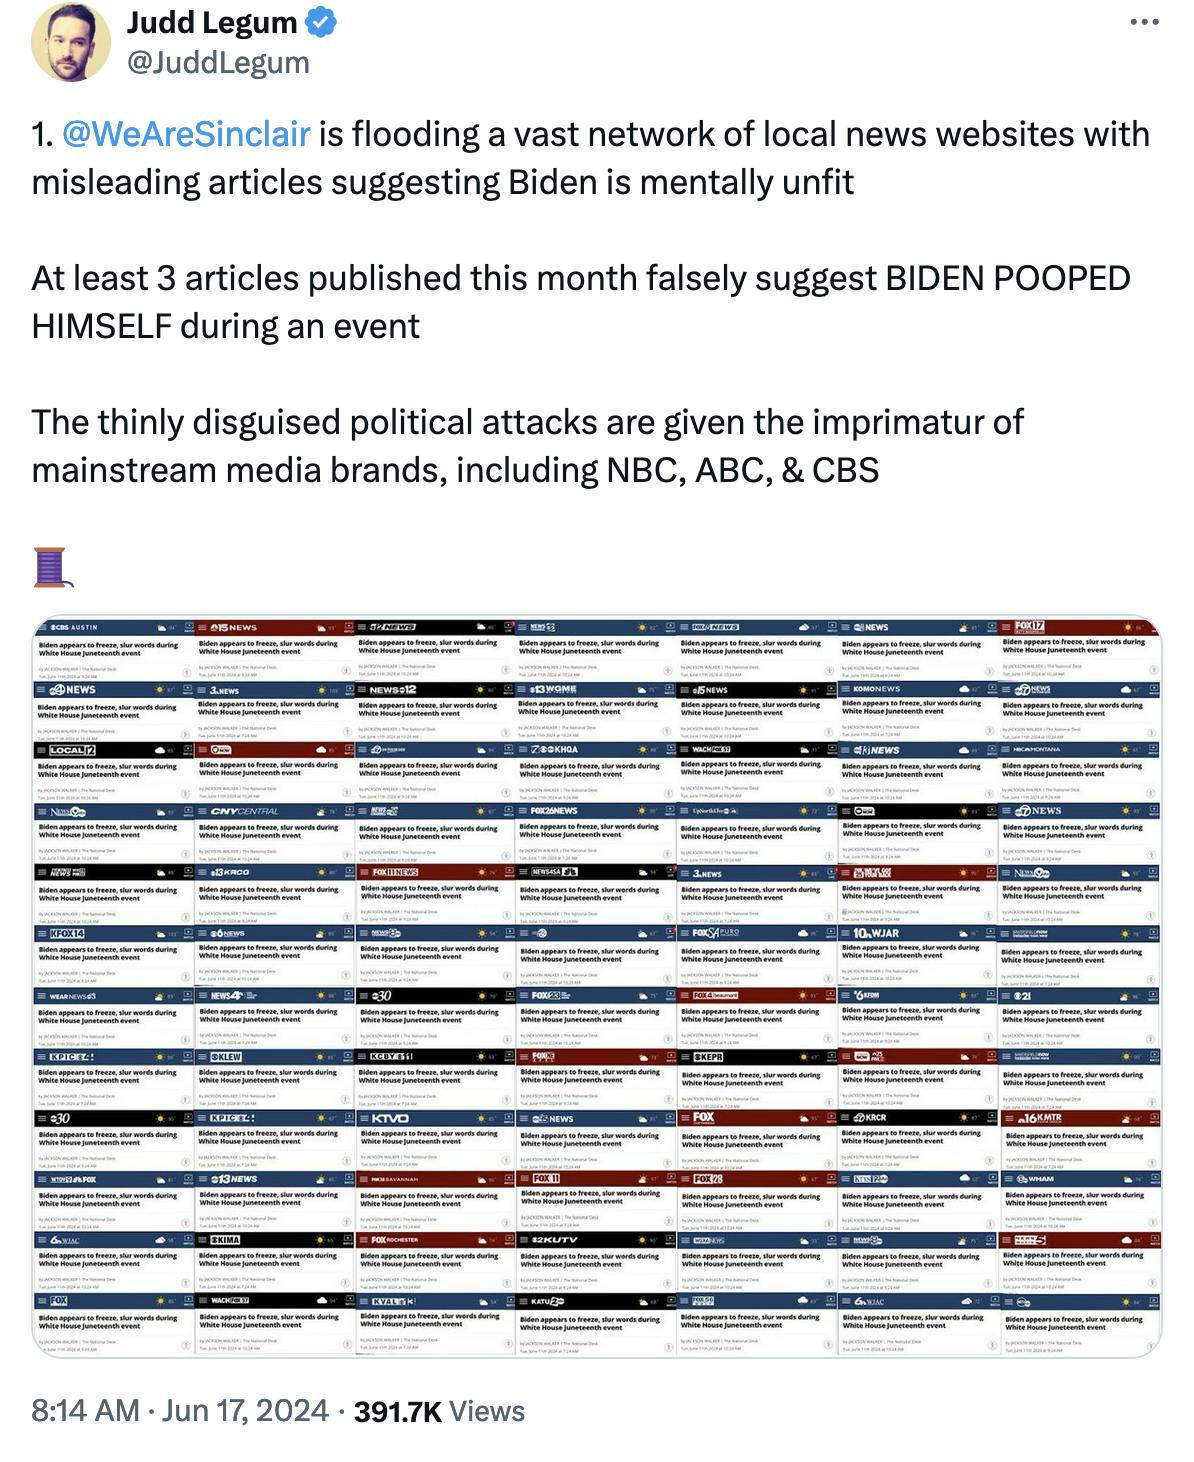 Twitter screenshot Judd Legum: 1. @WeAreSinclair is flooding a vast network of local news websites with misleading articles suggesting Biden is mentally unfit At least 3 articles published this month falsely suggest BIDEN POOPED HIMSELF during an event The thinly disguised political attacks are given the imprimatur of mainstream media brands, including NBC, ABC, & CBS